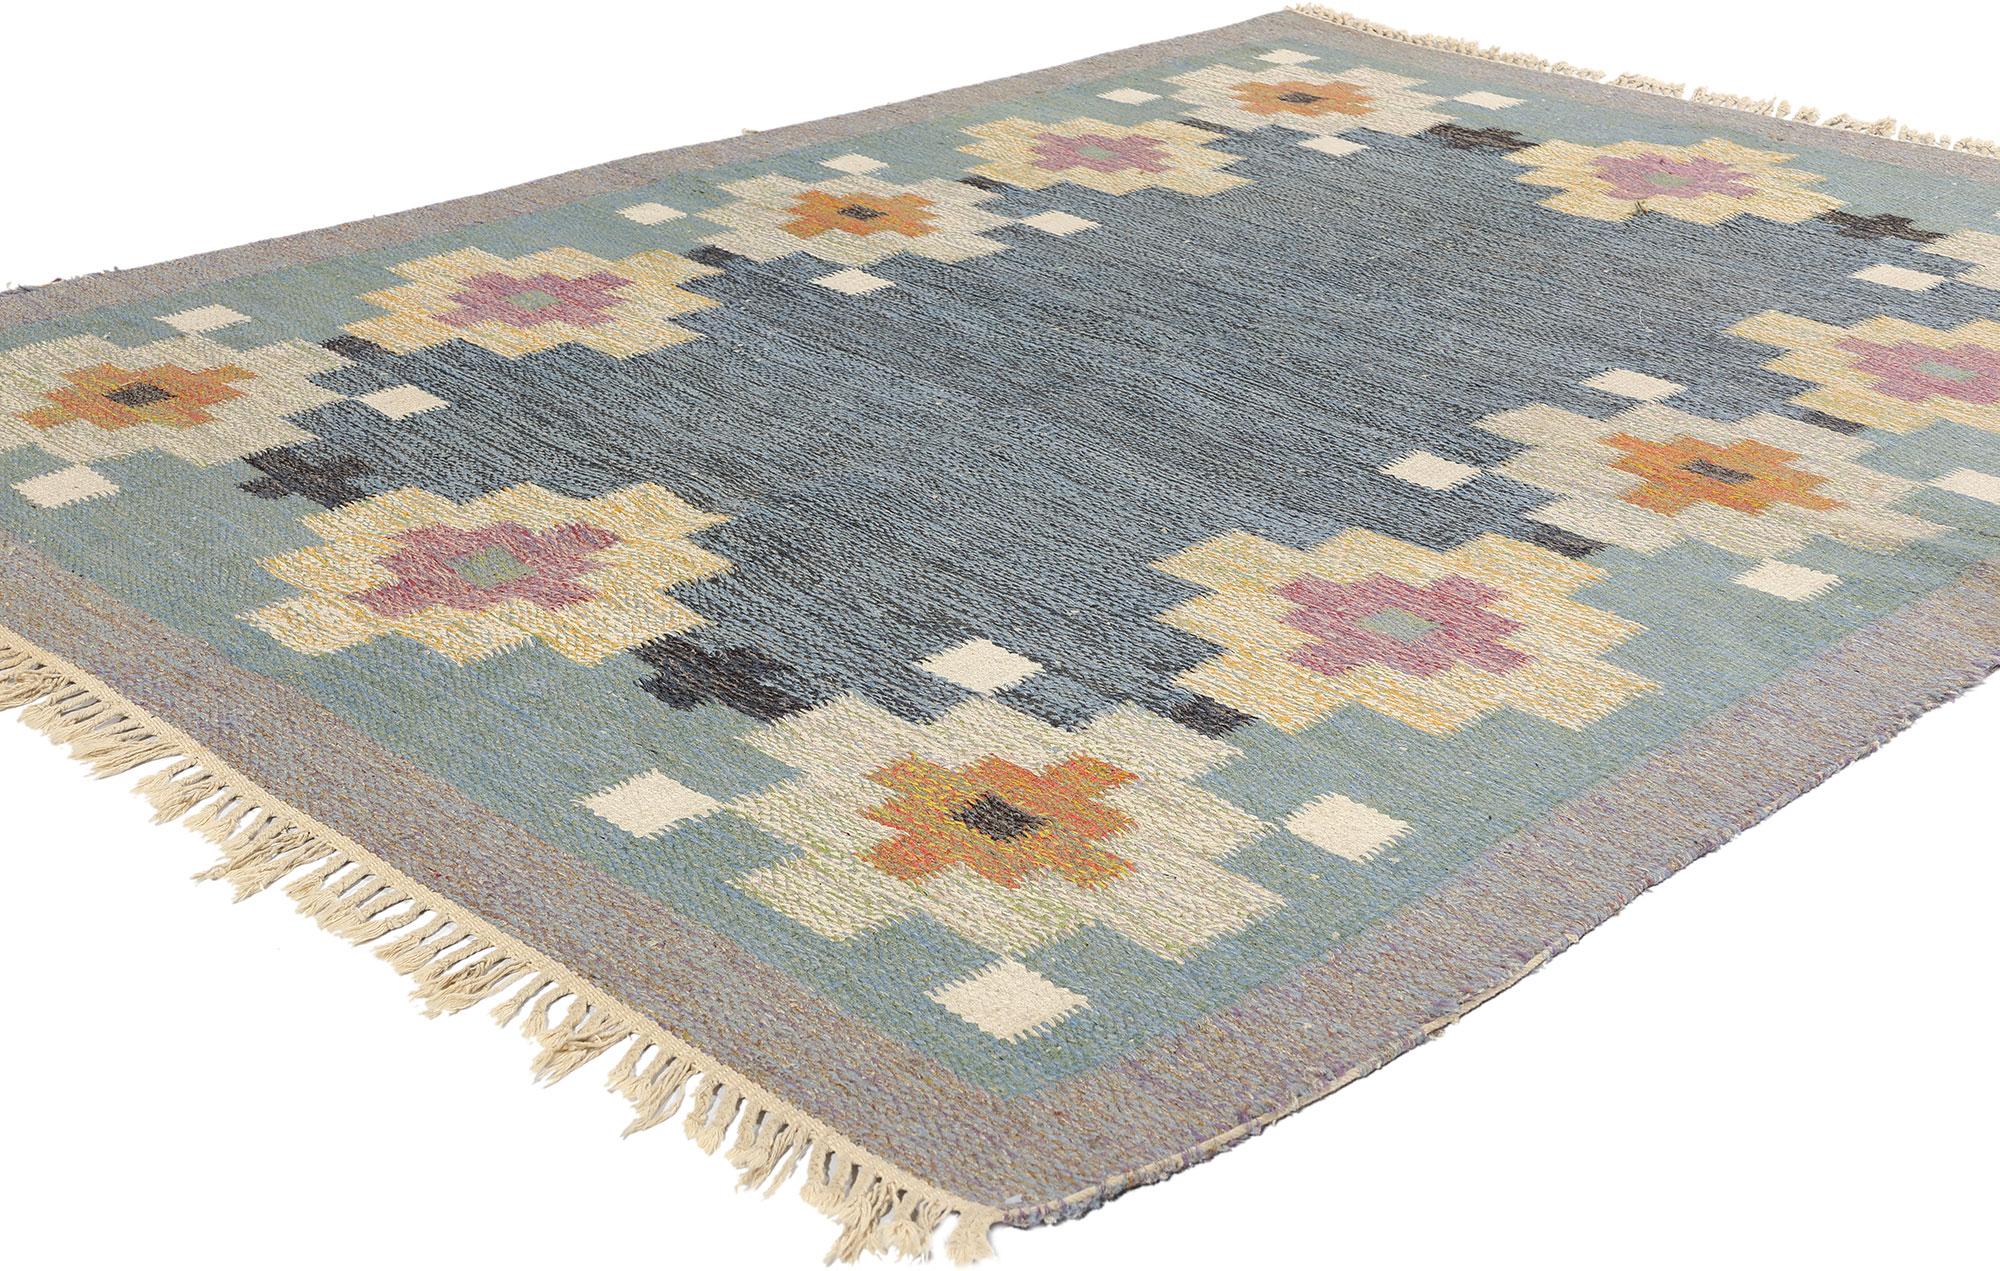 78258 Ida Rydelius Vintage Swedish Rollakan Rug, 05'07 x 07'06. Ida Rydelius stands out as a prominent textile artist renowned for her creation of decorative flat-weave carpets and rollakan rugs during the mid-20th century. Despite the scarcity of